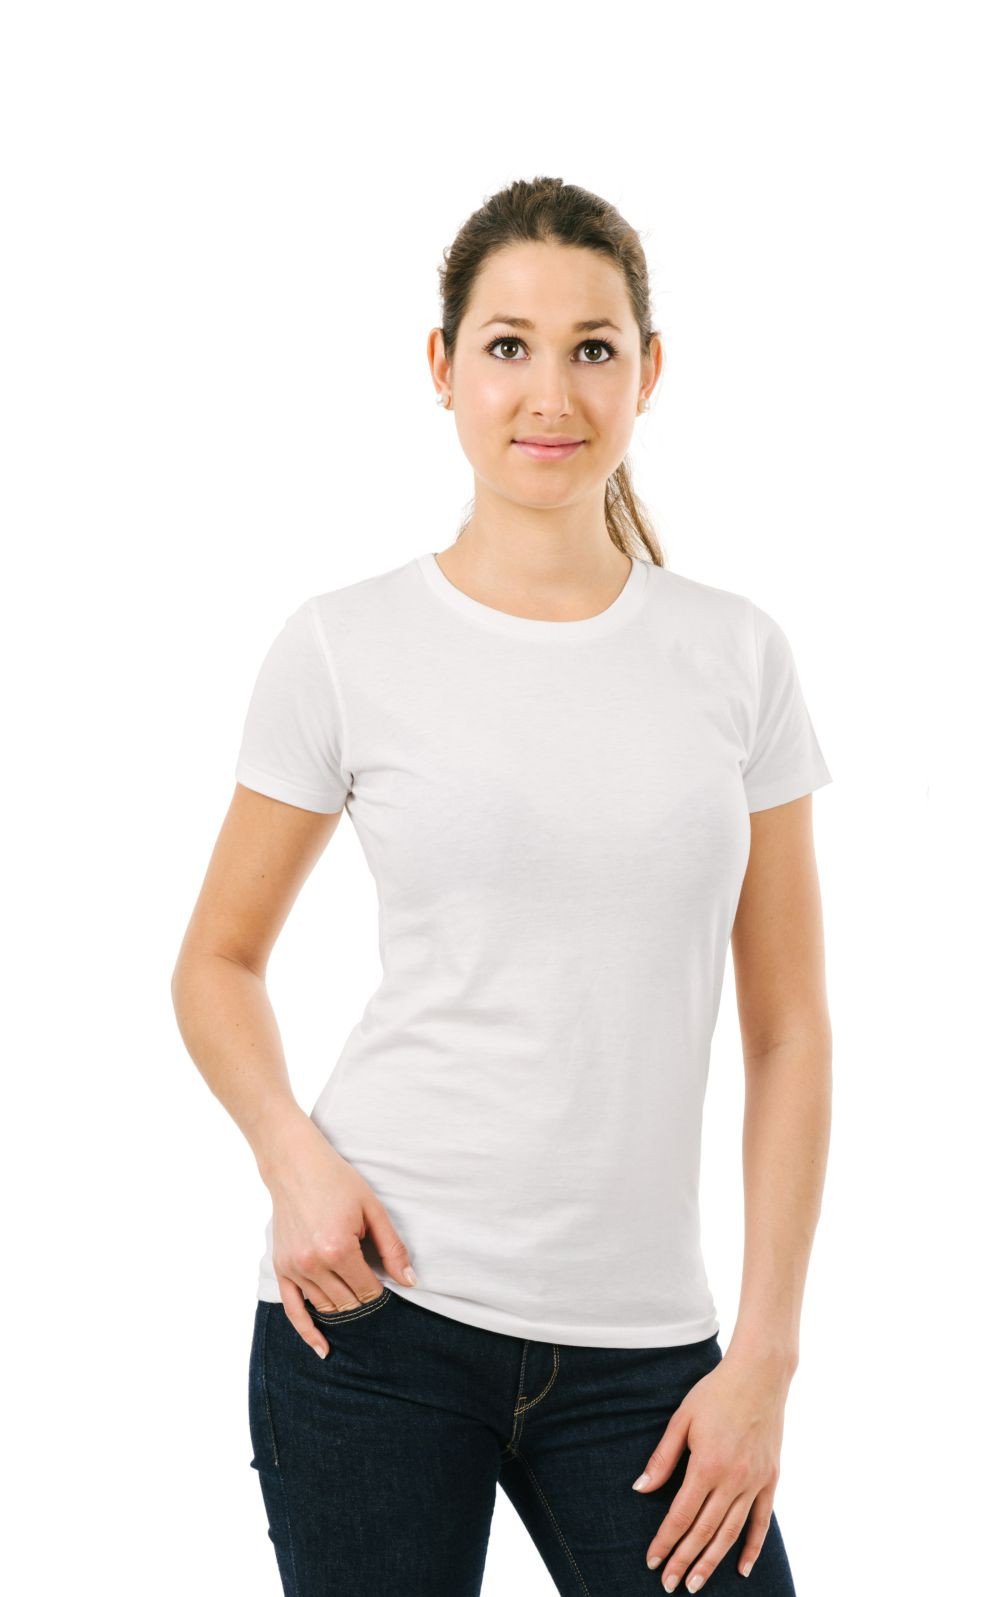 DOUBLE F ROUND NECK HALF SLEEVE WHITE COLOR PLAIN T-SHIRT FOR WOMEN